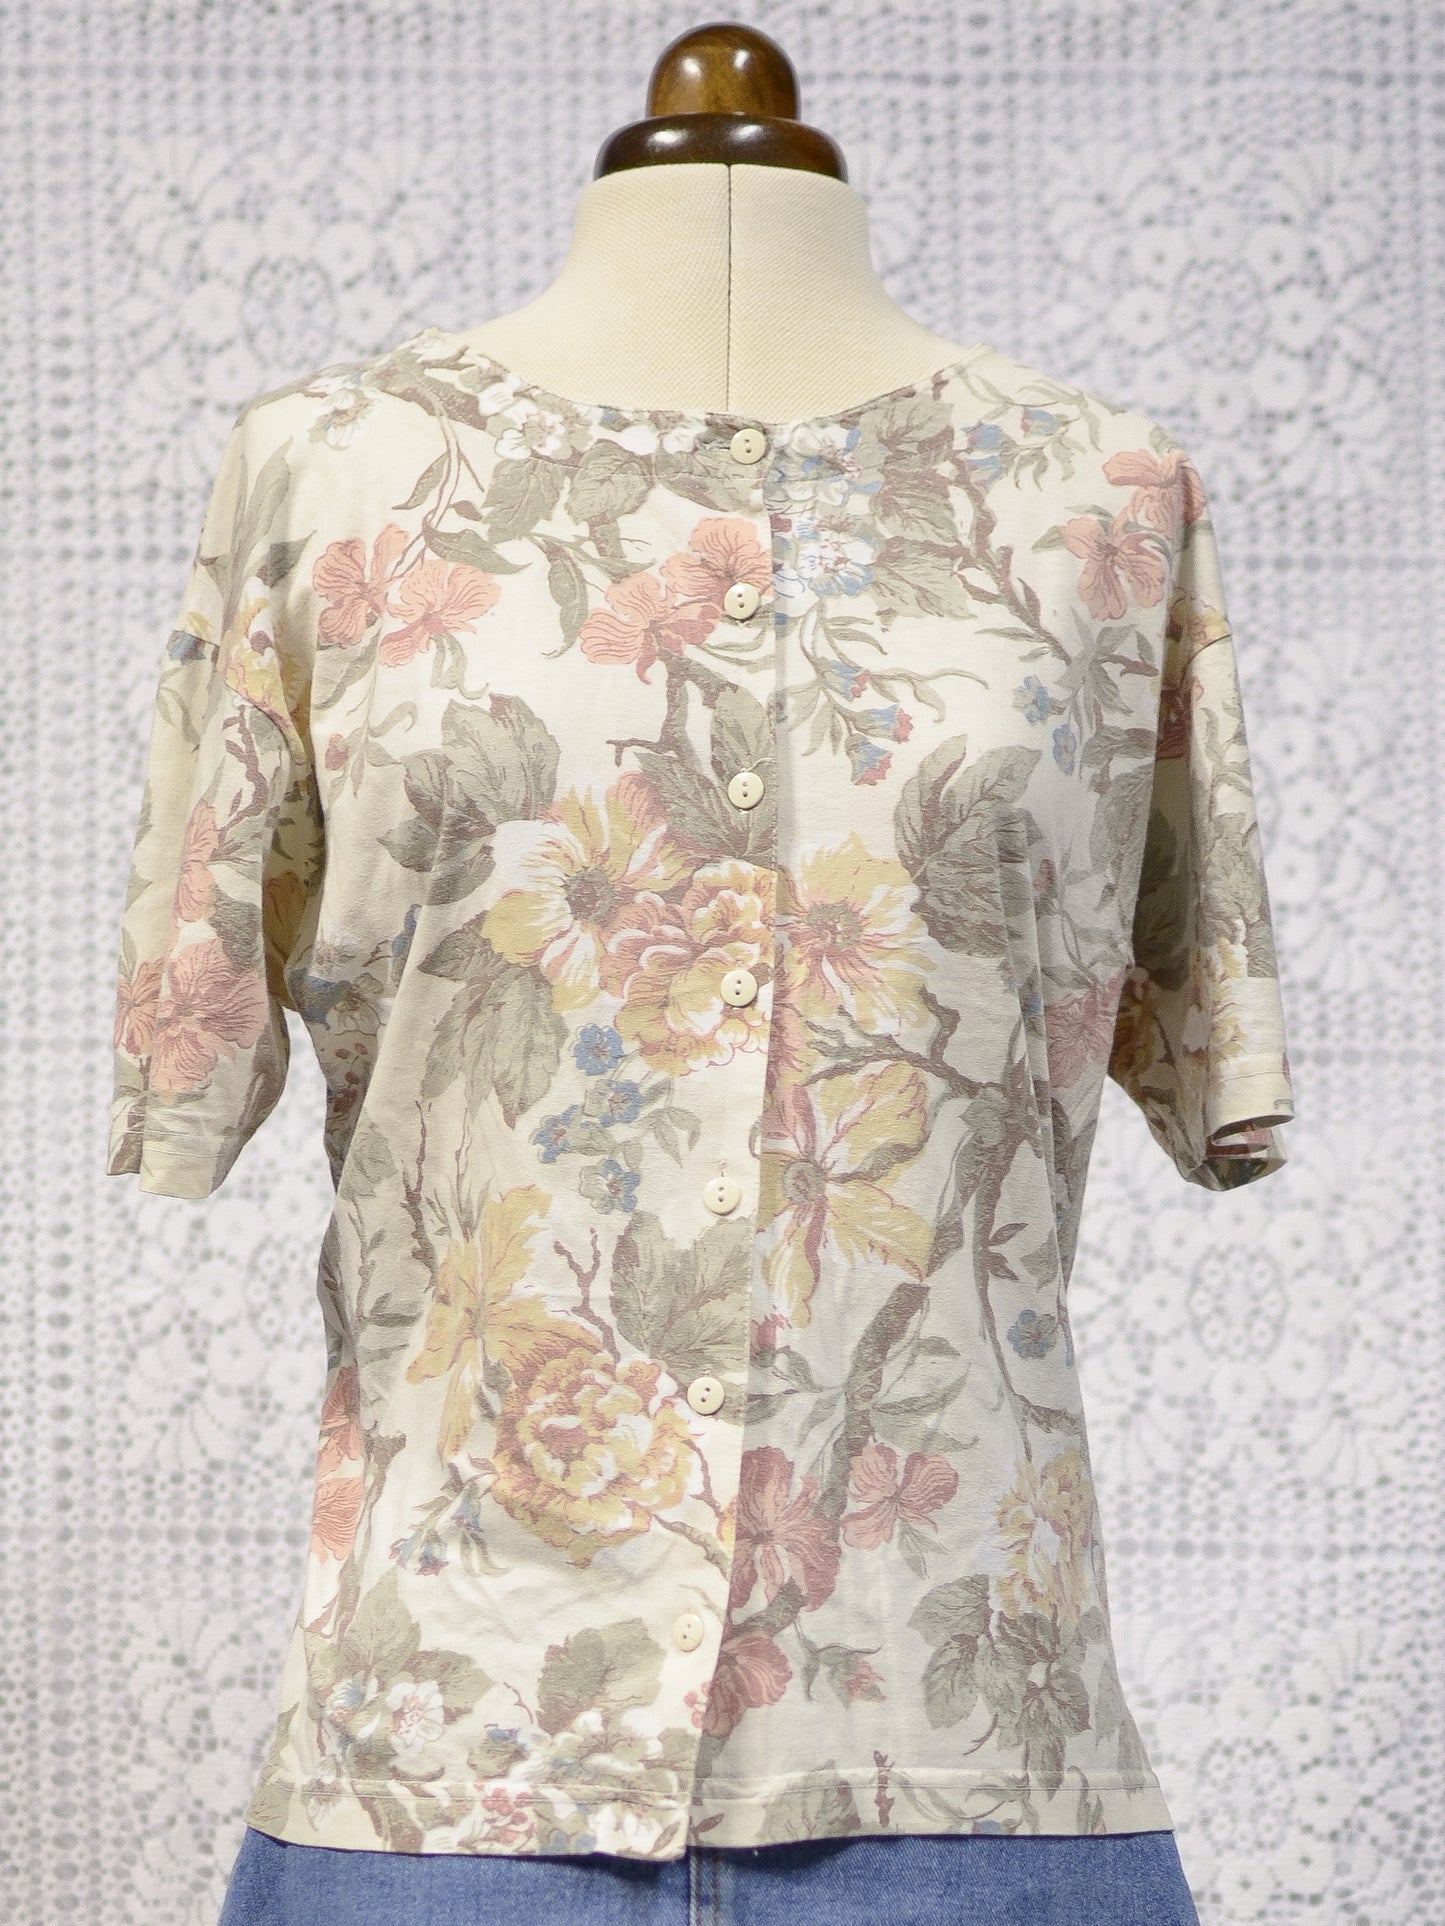 1990s Richards cream and brown floral button-up t-shirt top